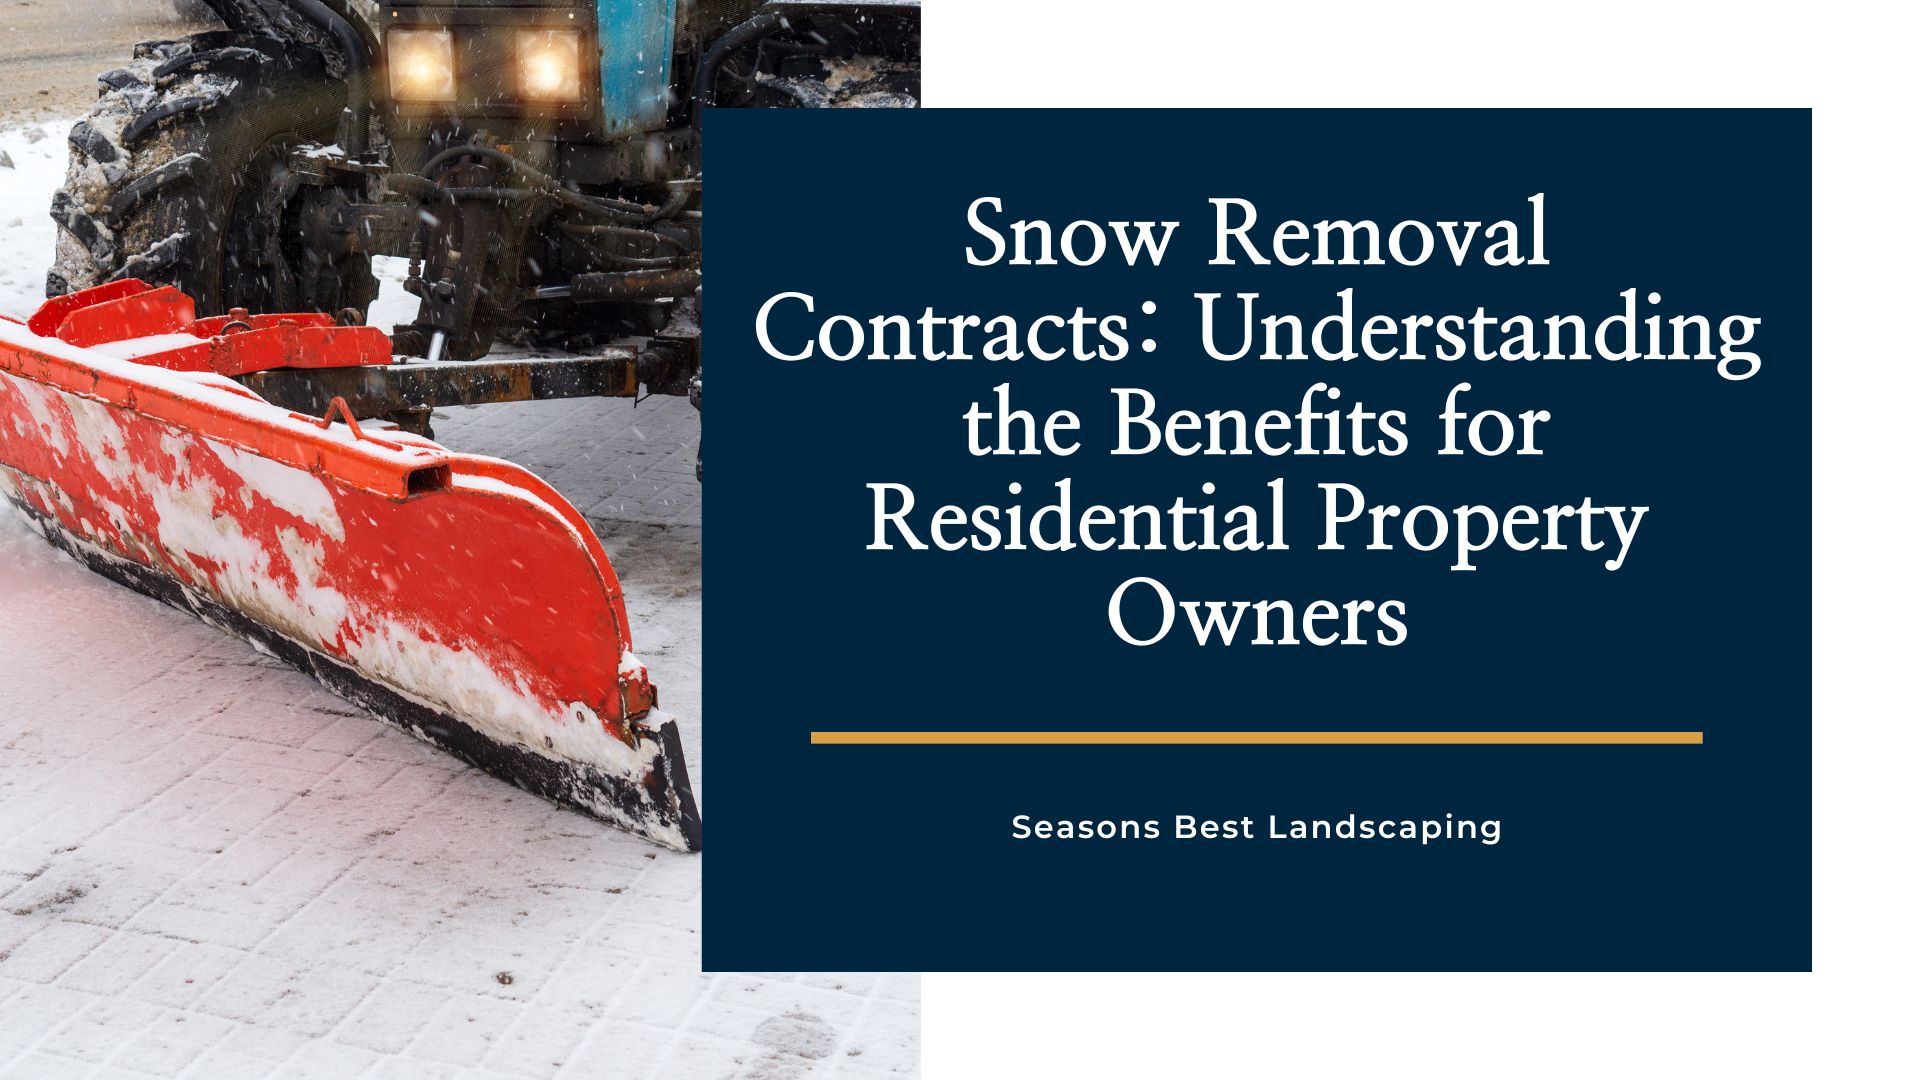 Snow Removal Contracts Understanding the Benefits for Residential Property Owners - Seasons Best Landscaping